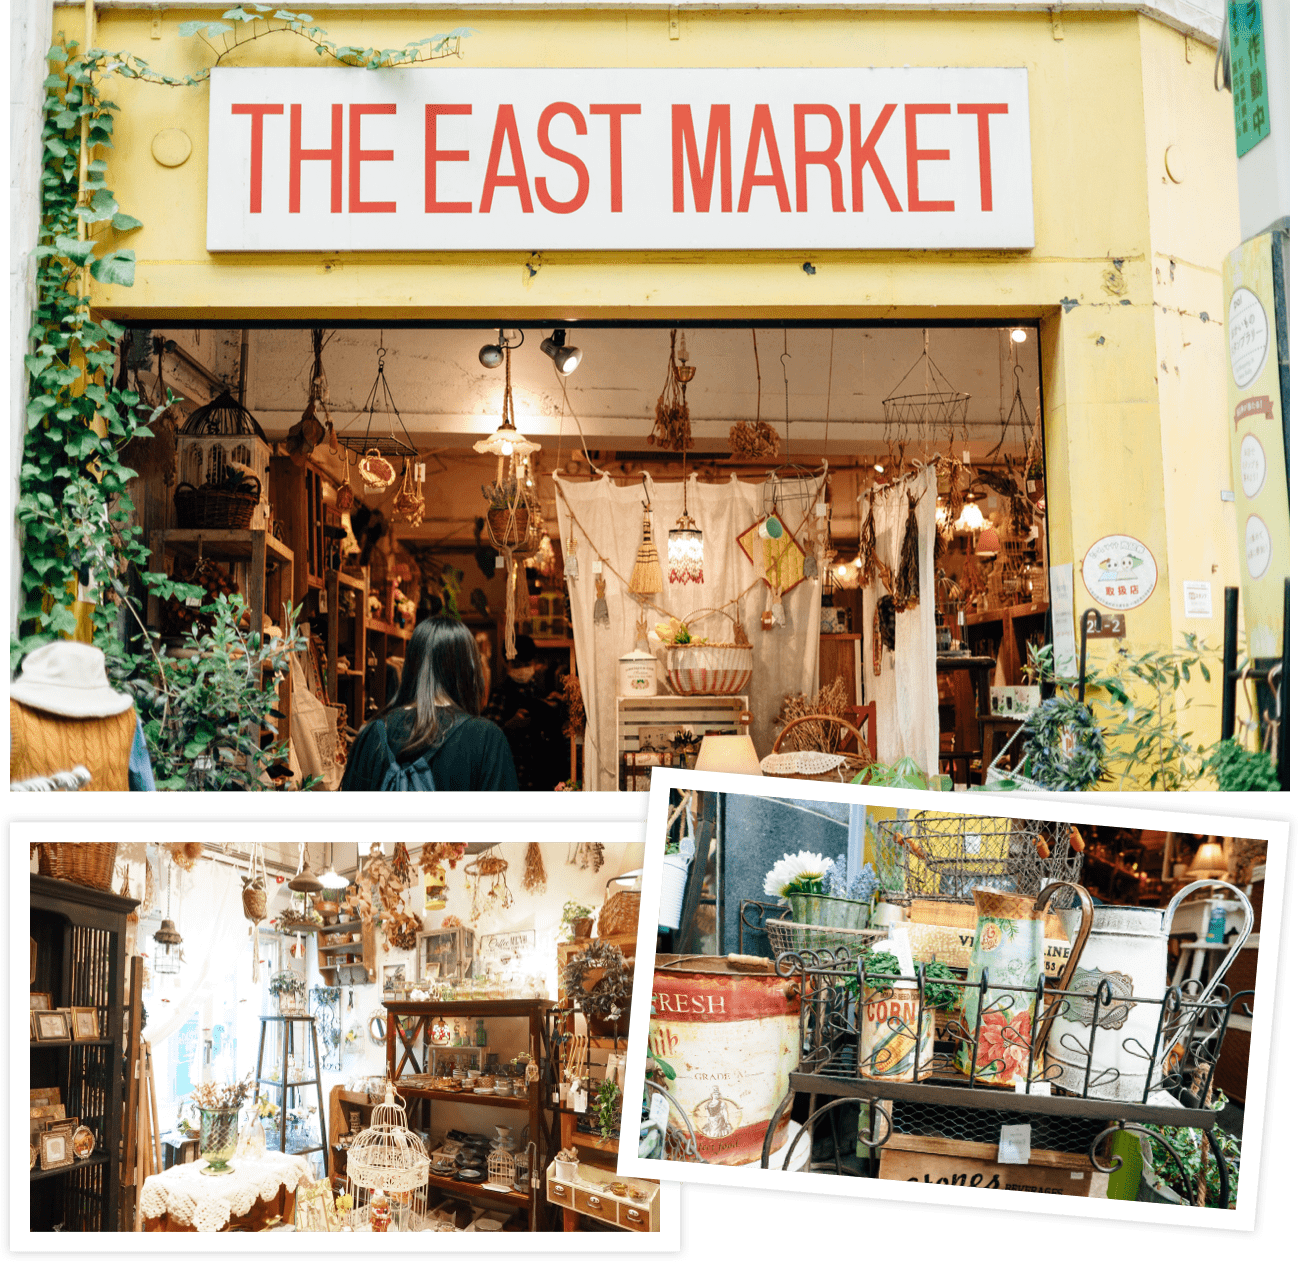 THE EAST MARKET